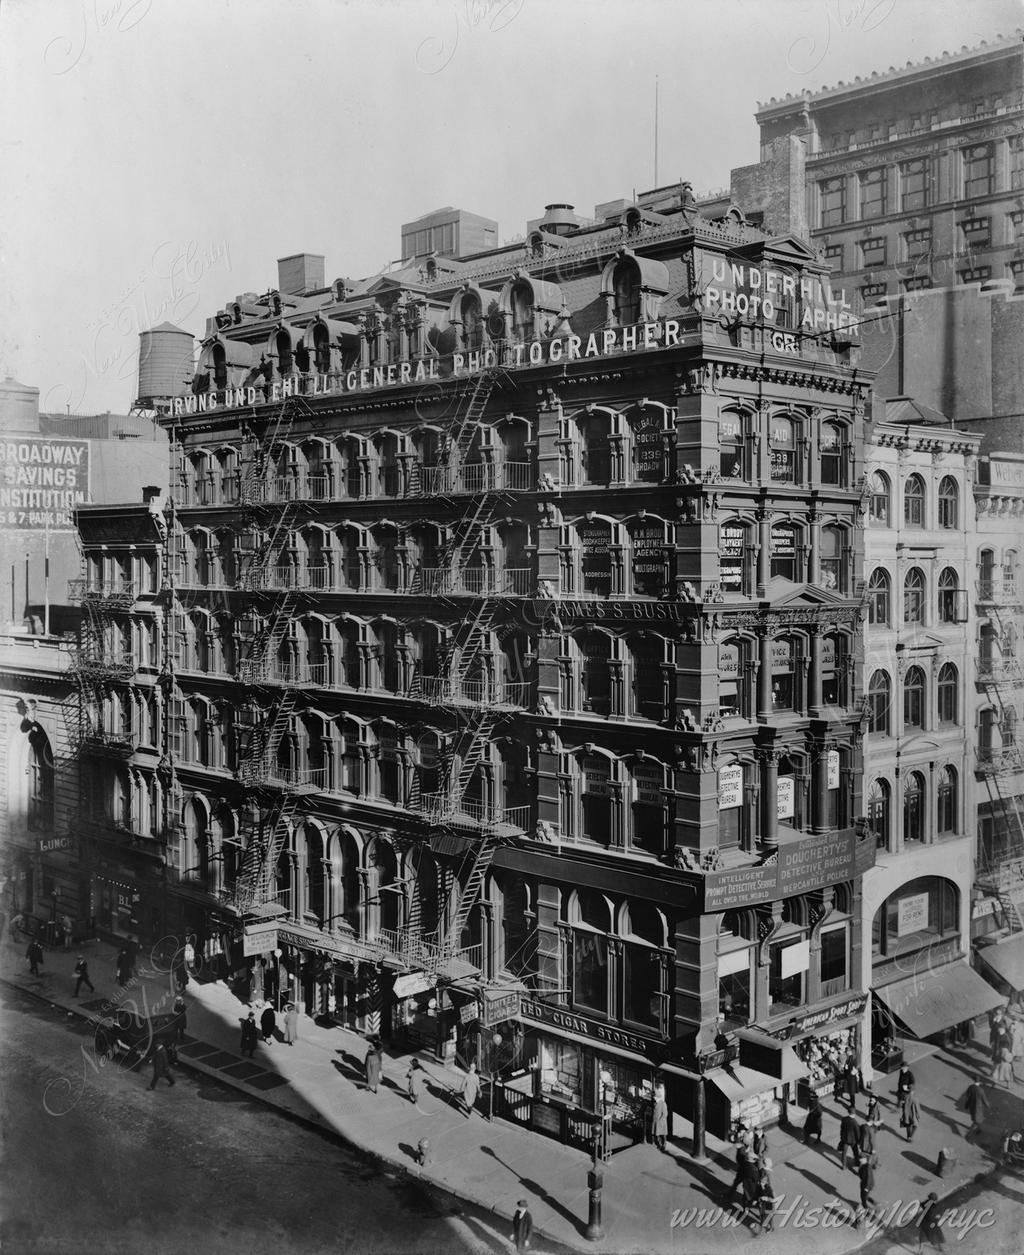 The corner of Broadway and Park Place, with pedestrians walking along street. A sign on top of the building reads "Irving Underhill General Photographer"